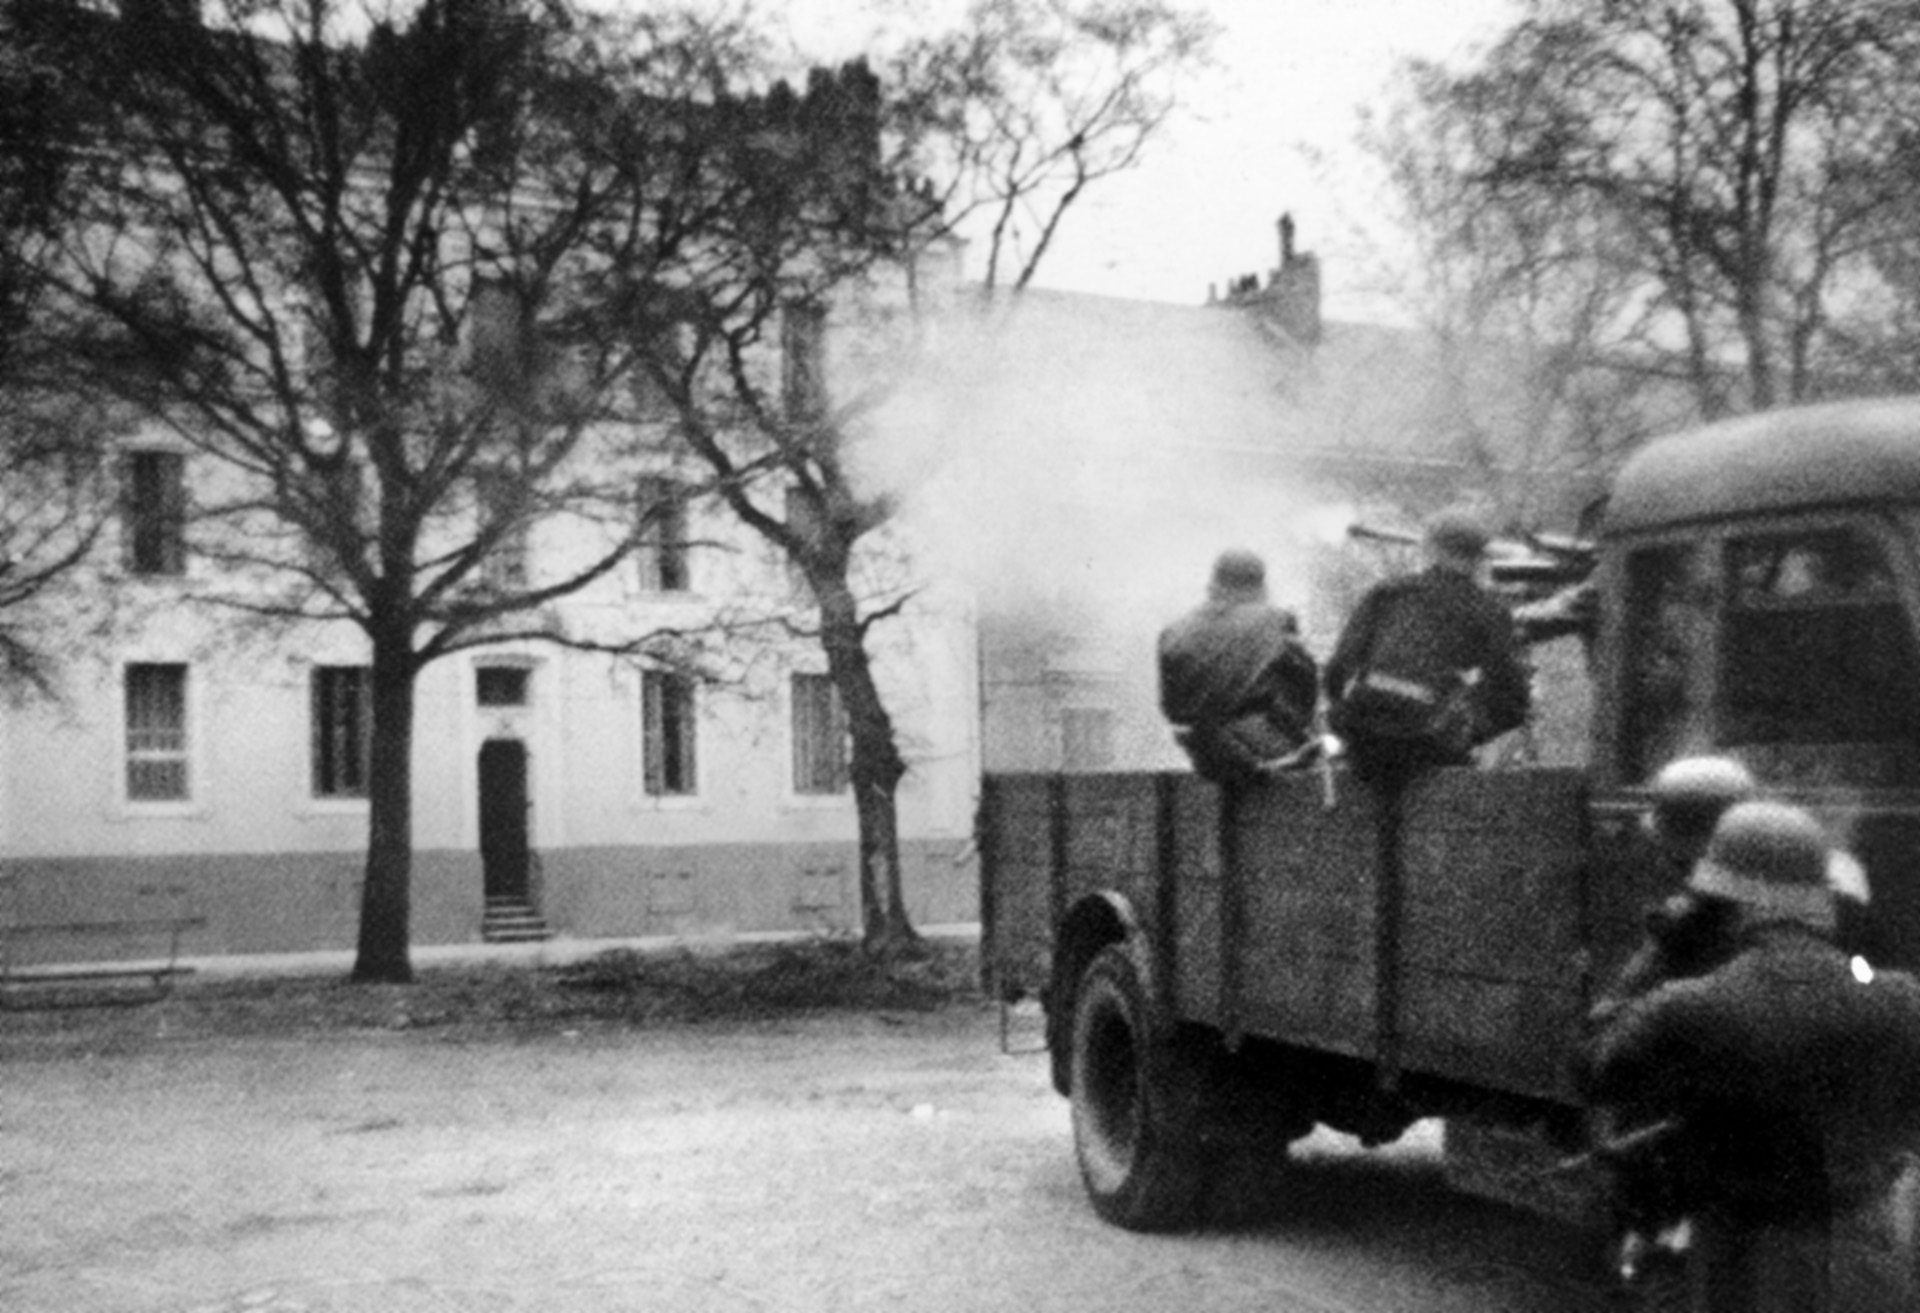 German troops use heavy weapons to try and flush out Commandos believed to be hiding in a house opposite the waterfront. Some 64 Commandos and 105 Royal Navy men died in the costly but successful raid. 